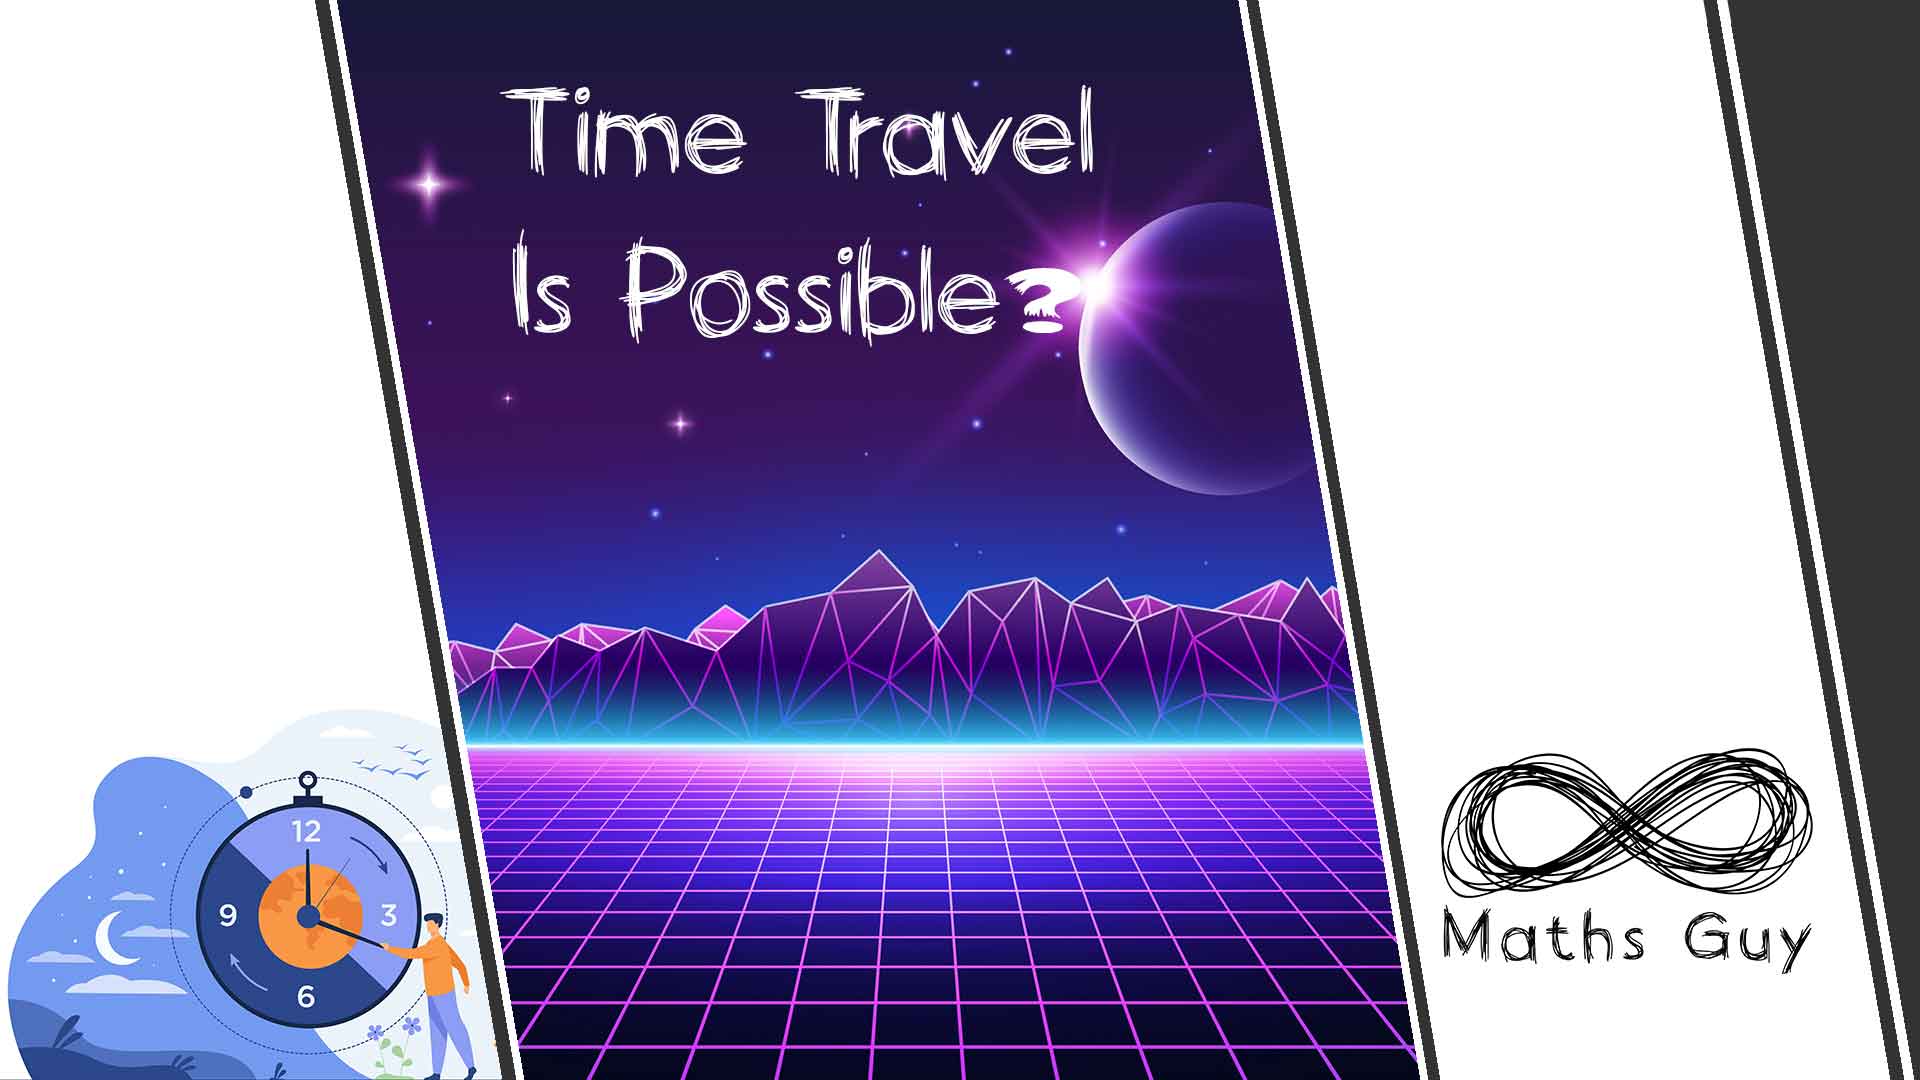 Time travel is possible - a time for me post by Maths Guy